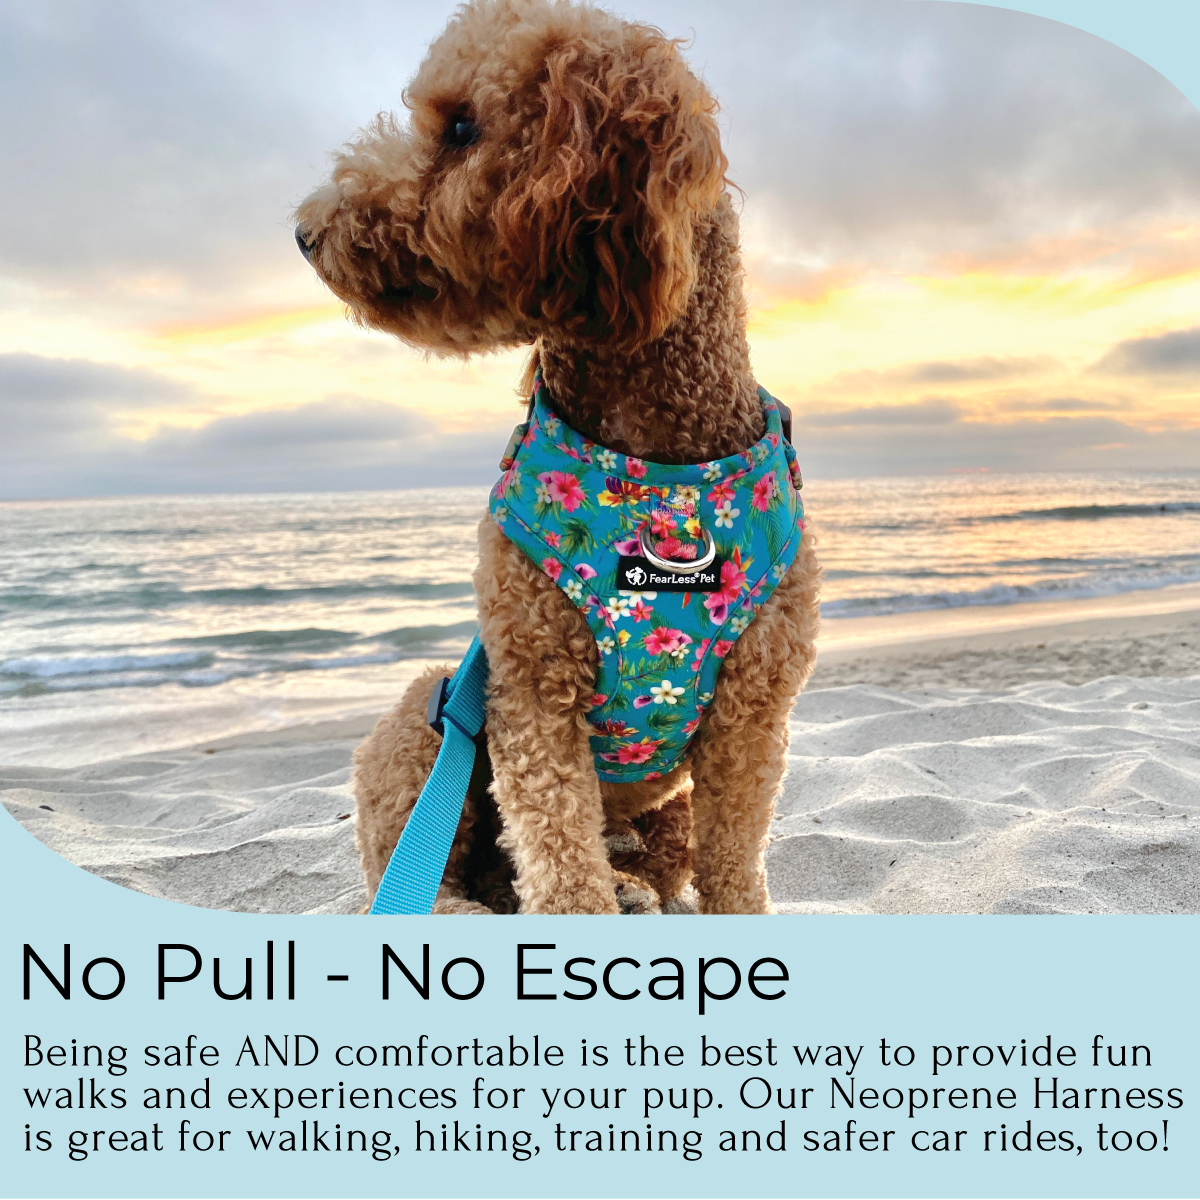 a photo of a tan poodle sitting on the beach with a sunset wearing a teal blue floral small dog harness that is no pull and no escape dog harness